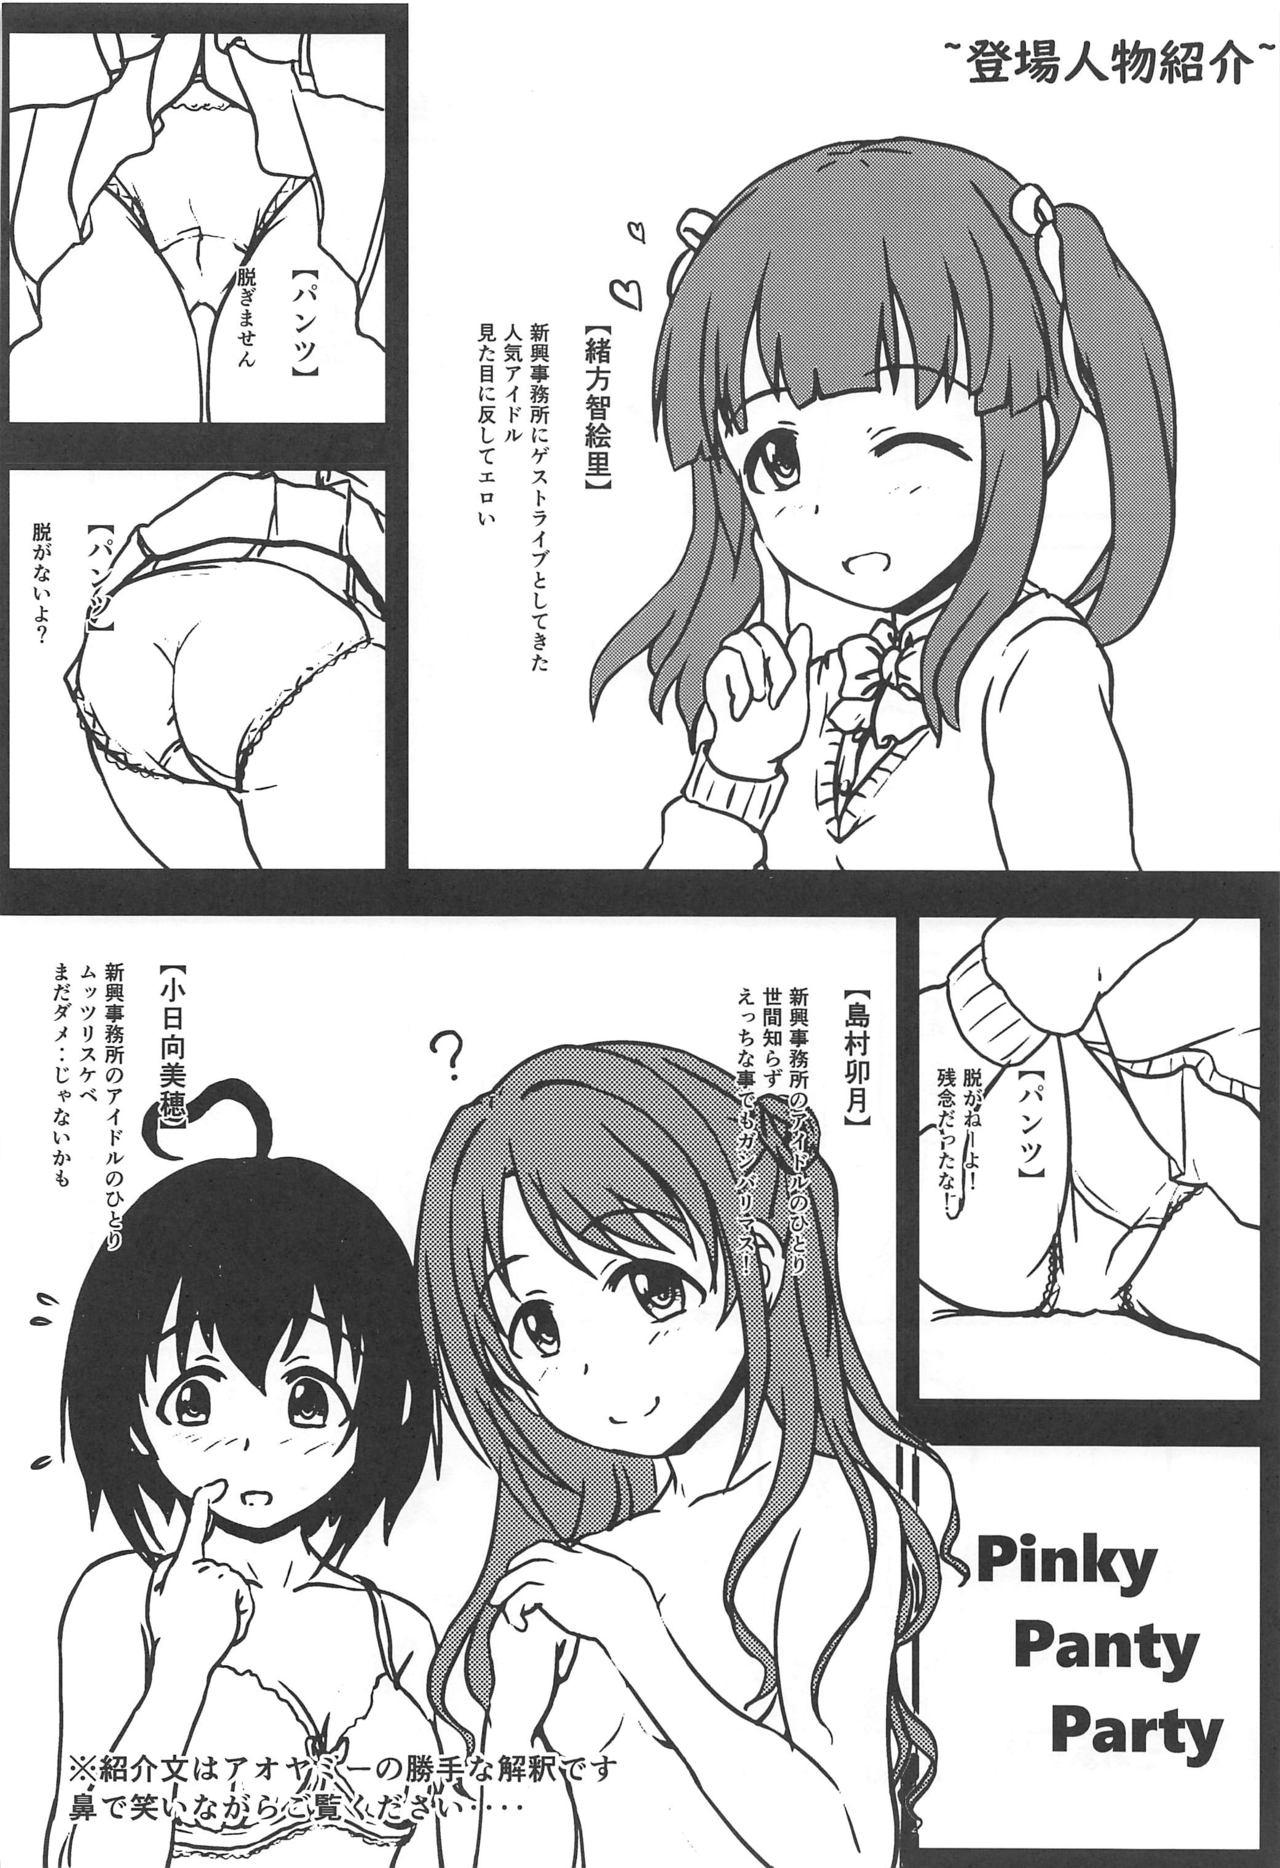 Ex Gf Pinky Panty Party - The idolmaster Perverted - Page 3